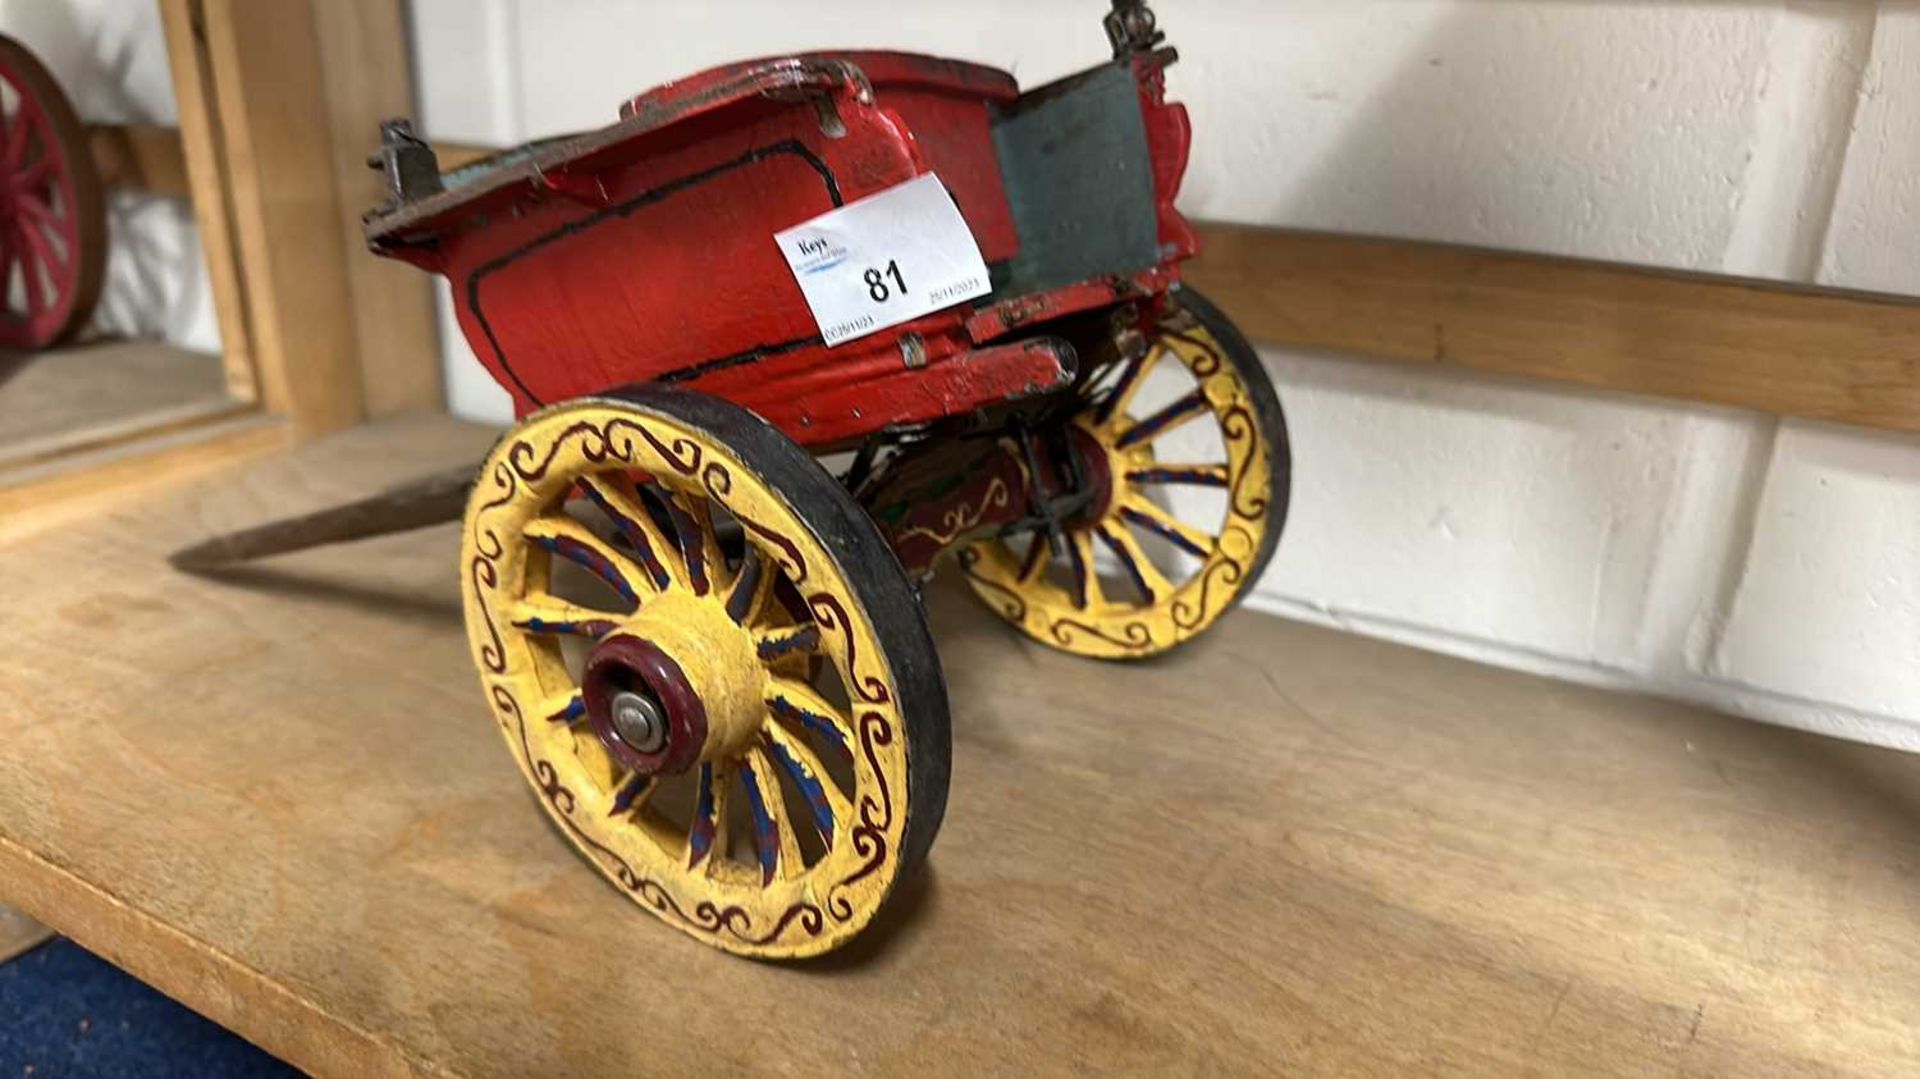 A scratch built model of a small single axle cart, painted in red and yellow, approx 34cm long - Image 3 of 5